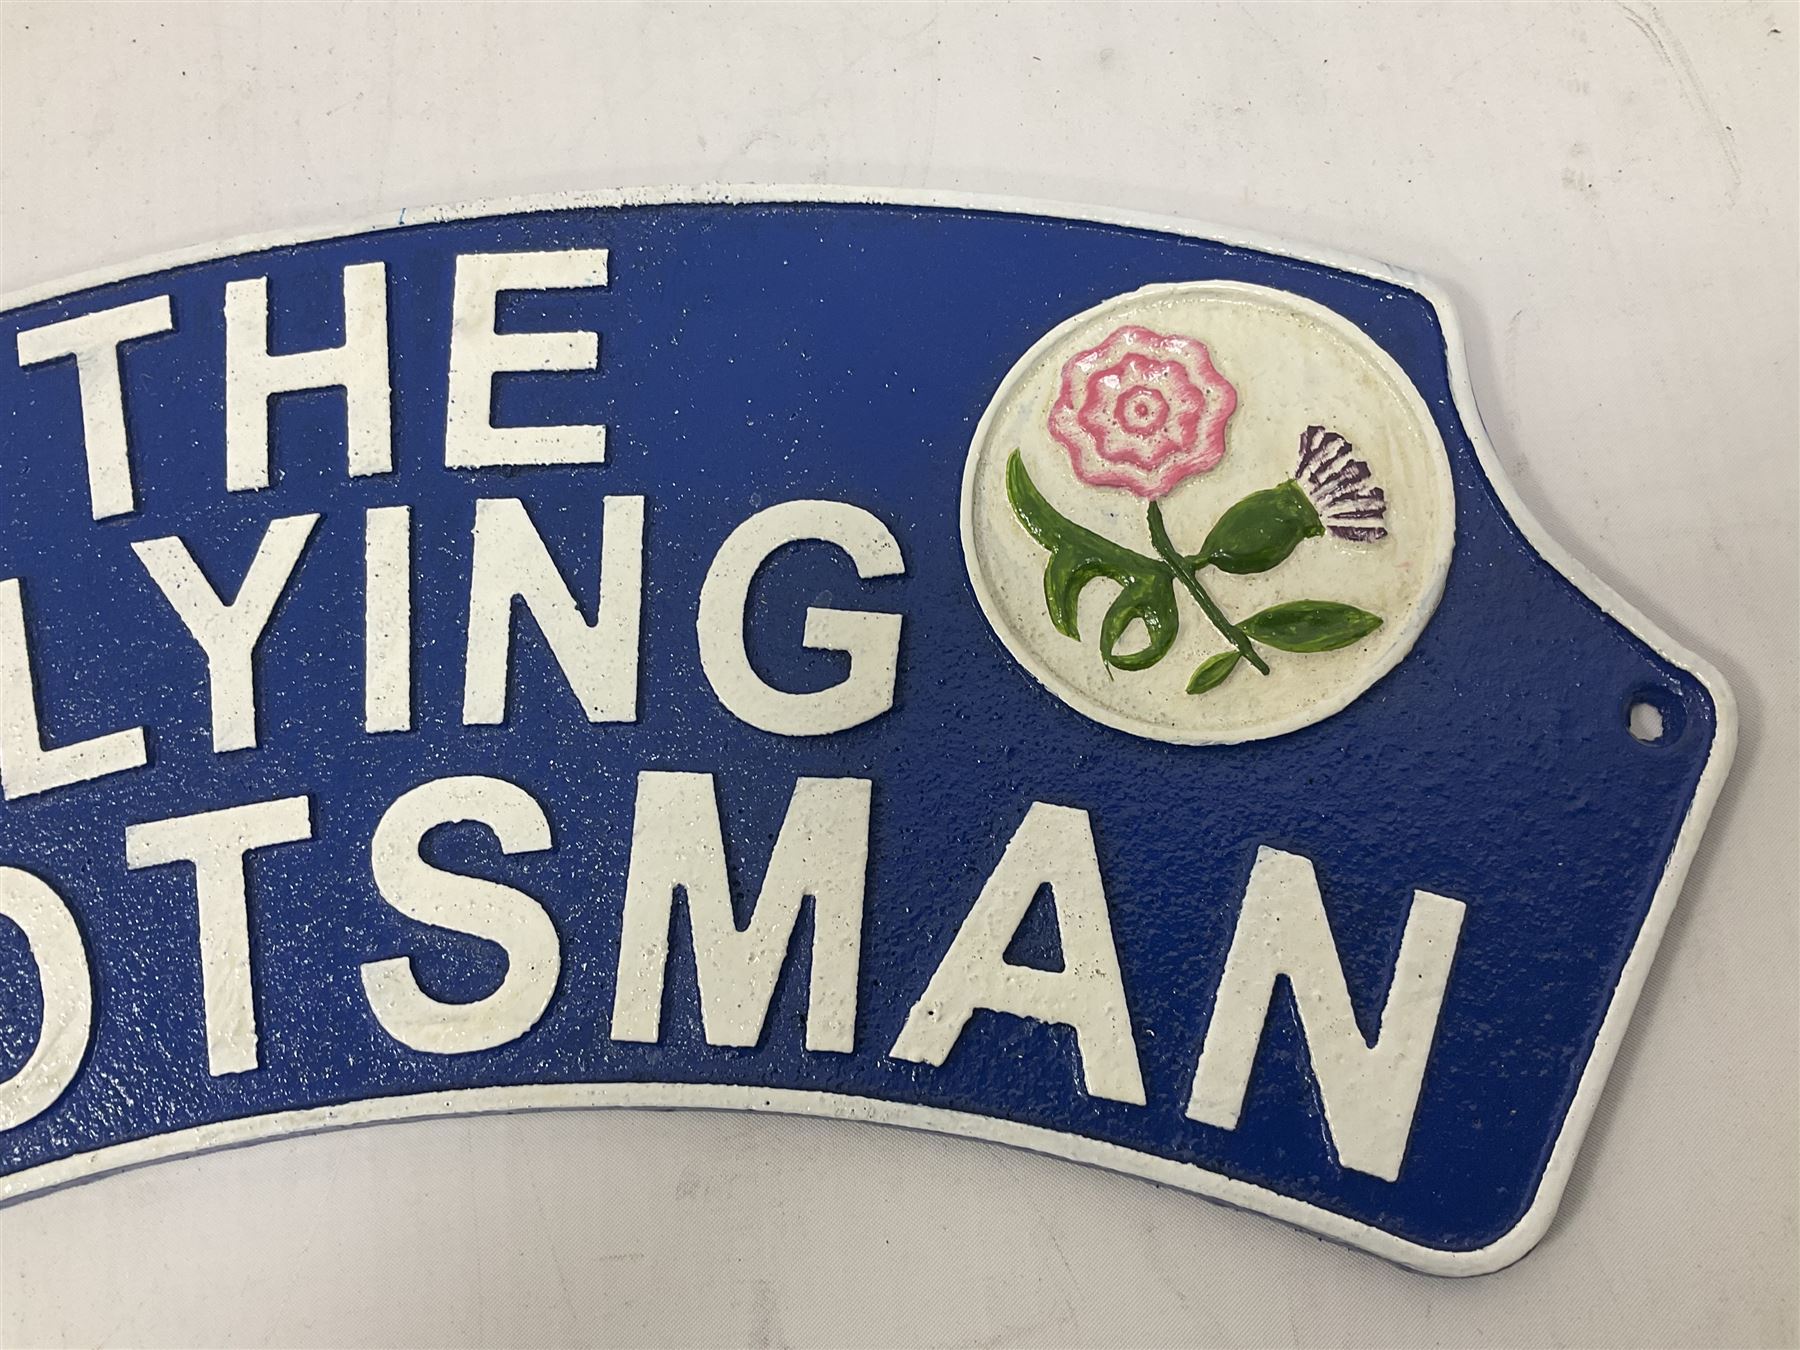 Cast metal sign 'The Flying Scotsman' - Image 5 of 5